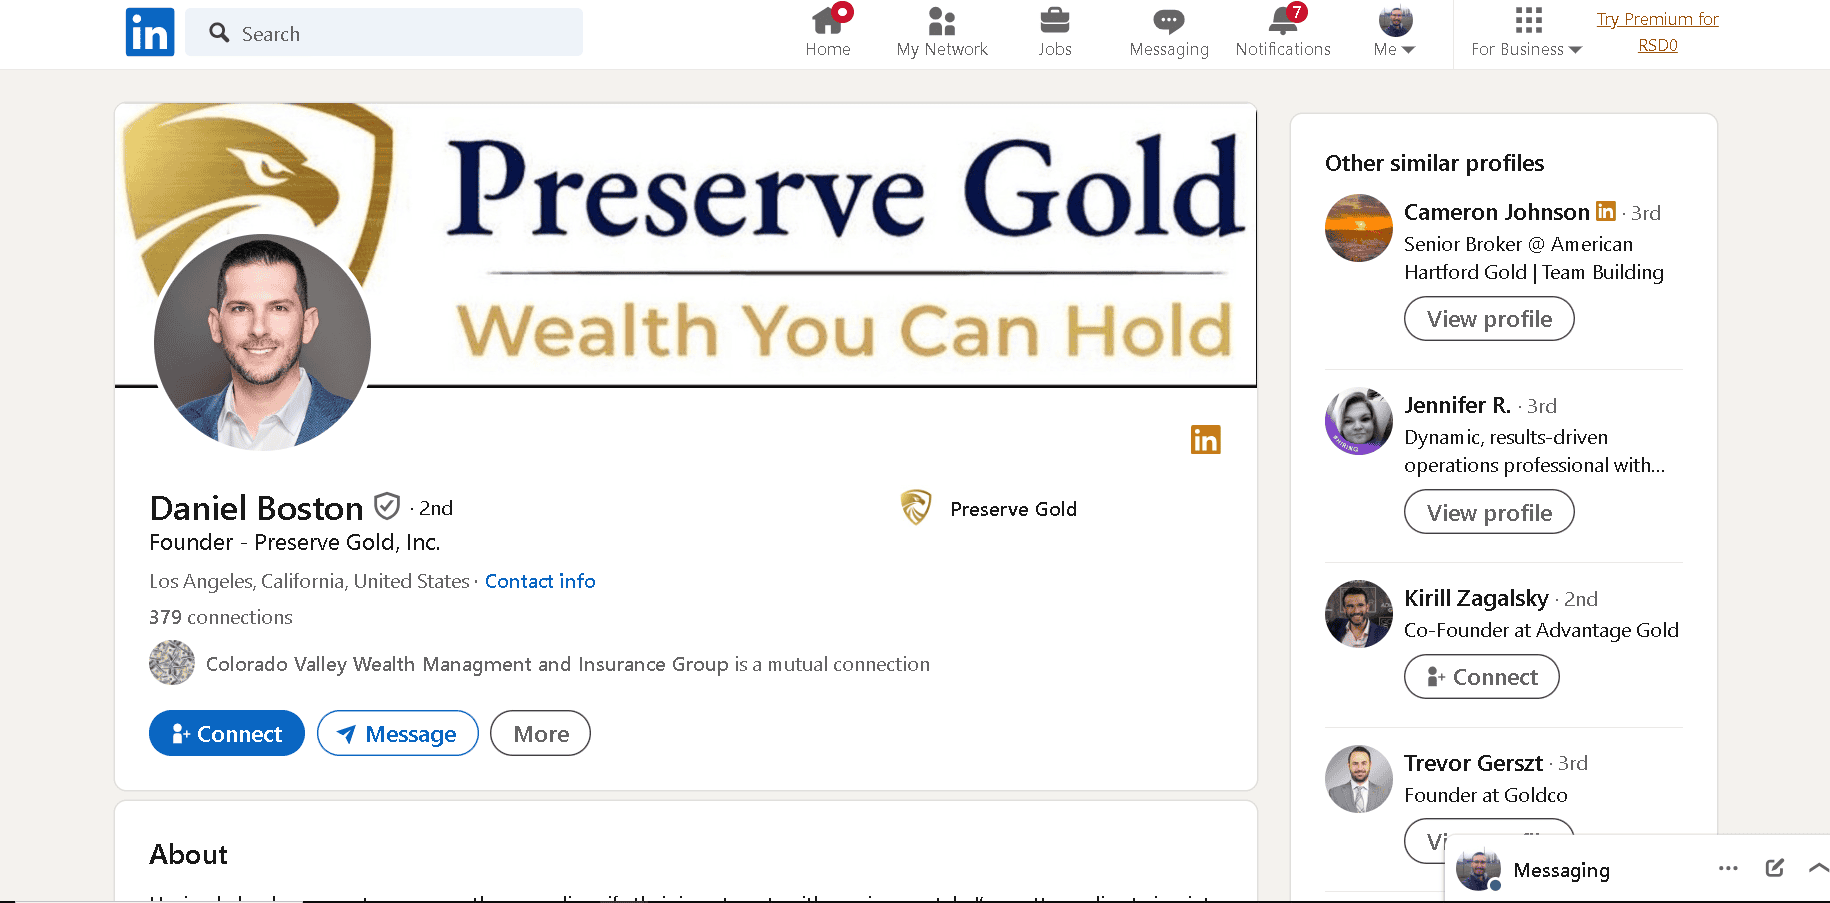 Daniel Boston is the owner of Preserve Gold